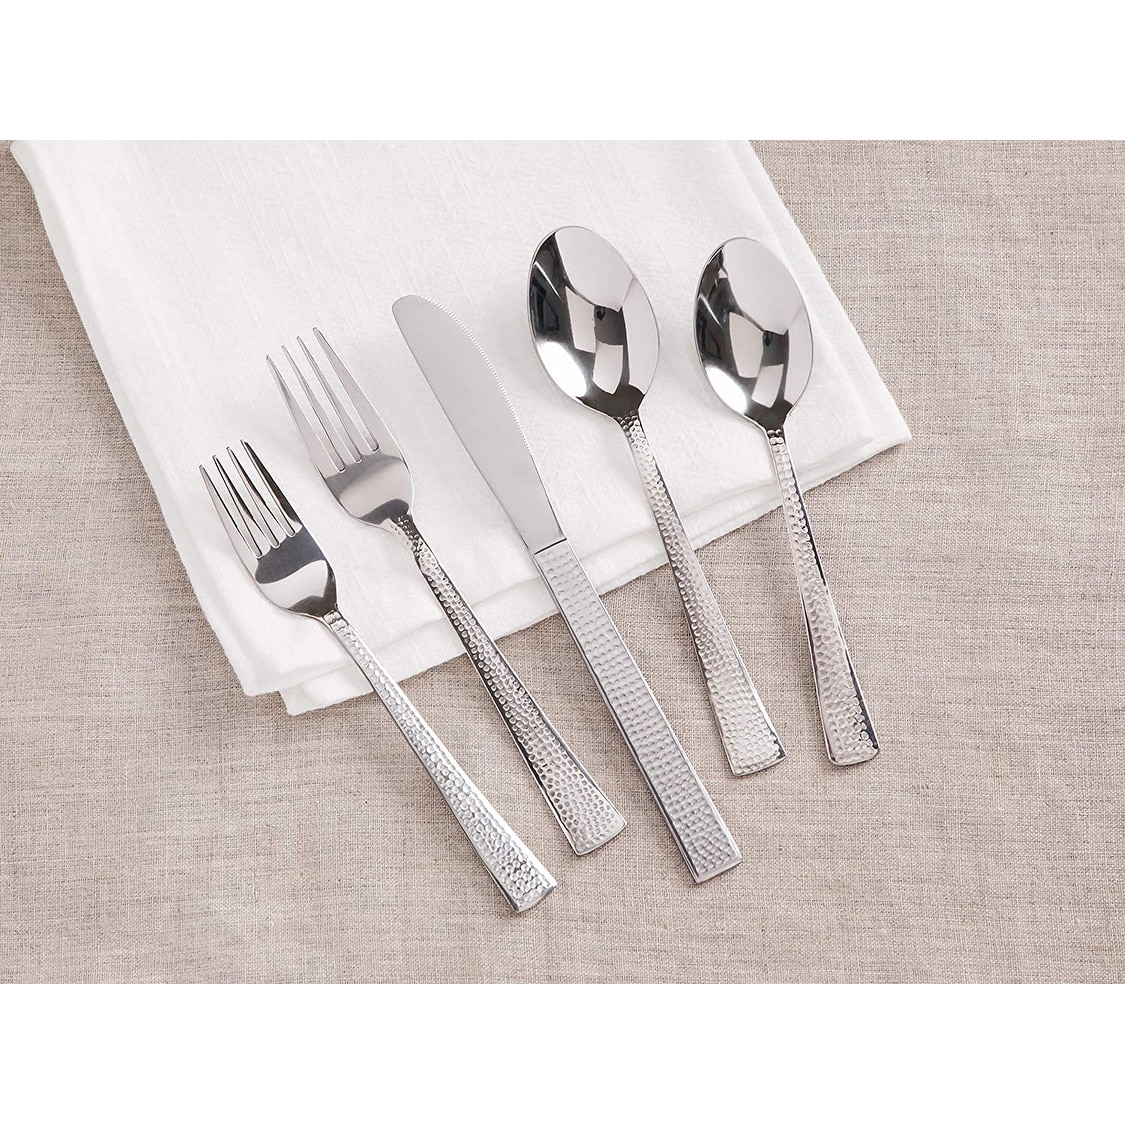 https://ak1.ostkcdn.com/images/products/is/images/direct/1a8303b2280f1b4450a1df72c77feb6b6c5a0a53/20-Piece-Silverware-Set-Flatware-Stainless-Steel-Utensils-Kitchen-Apartment-Essentials-Tableware-Home-Cutlery-Set.jpg